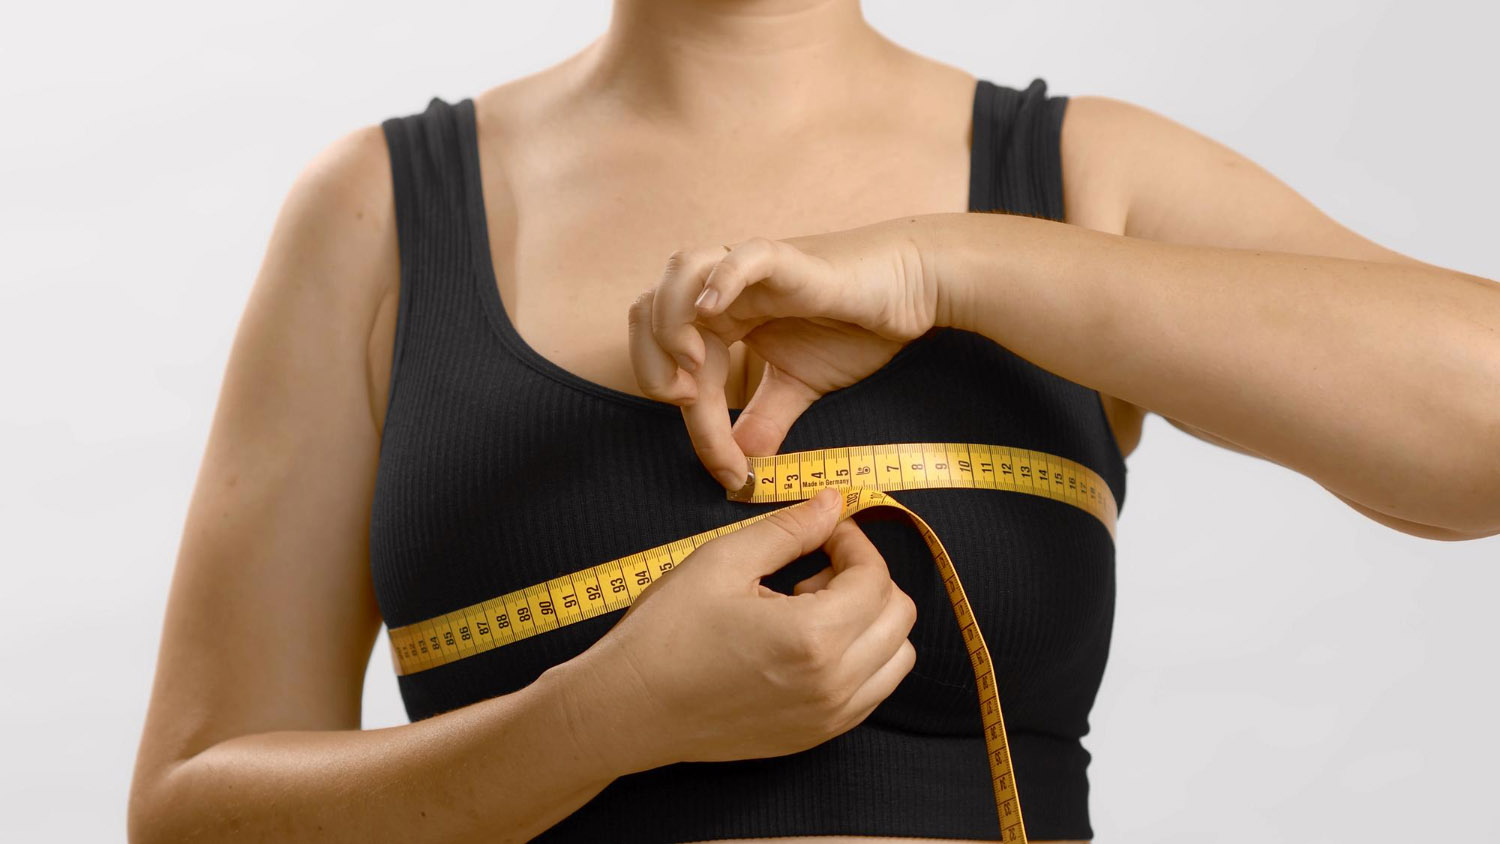 Why Breast Reduction for Women